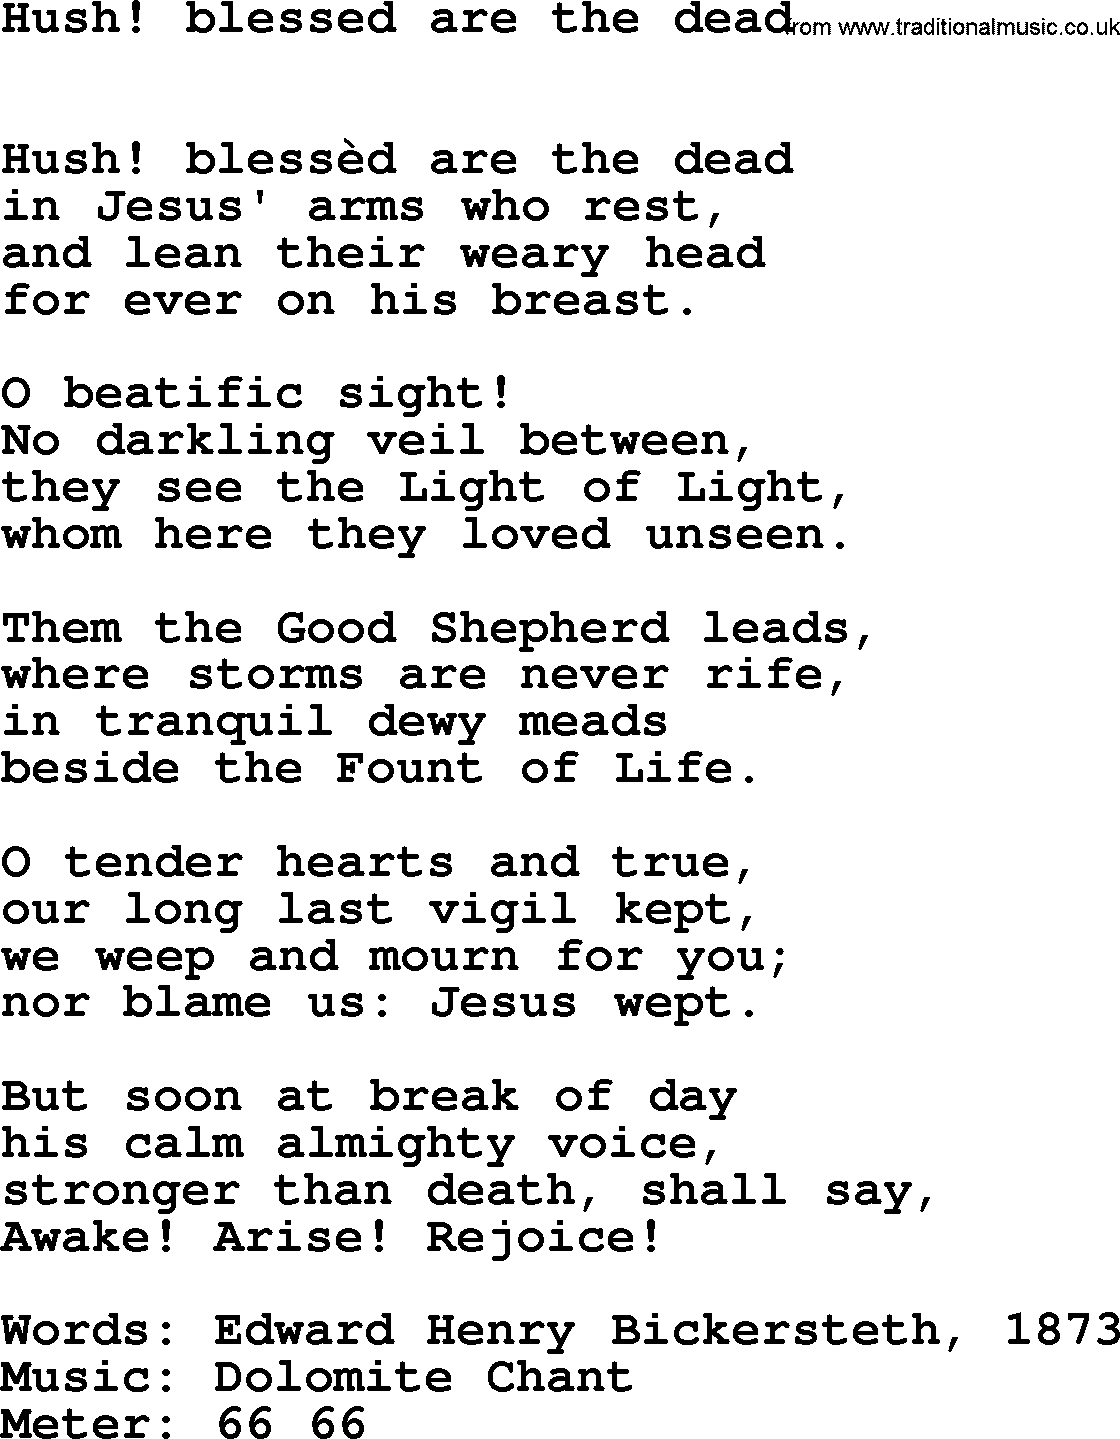 Book of Common Praise Hymn: Hush! Blessed Are The Dead.txt lyrics with midi music